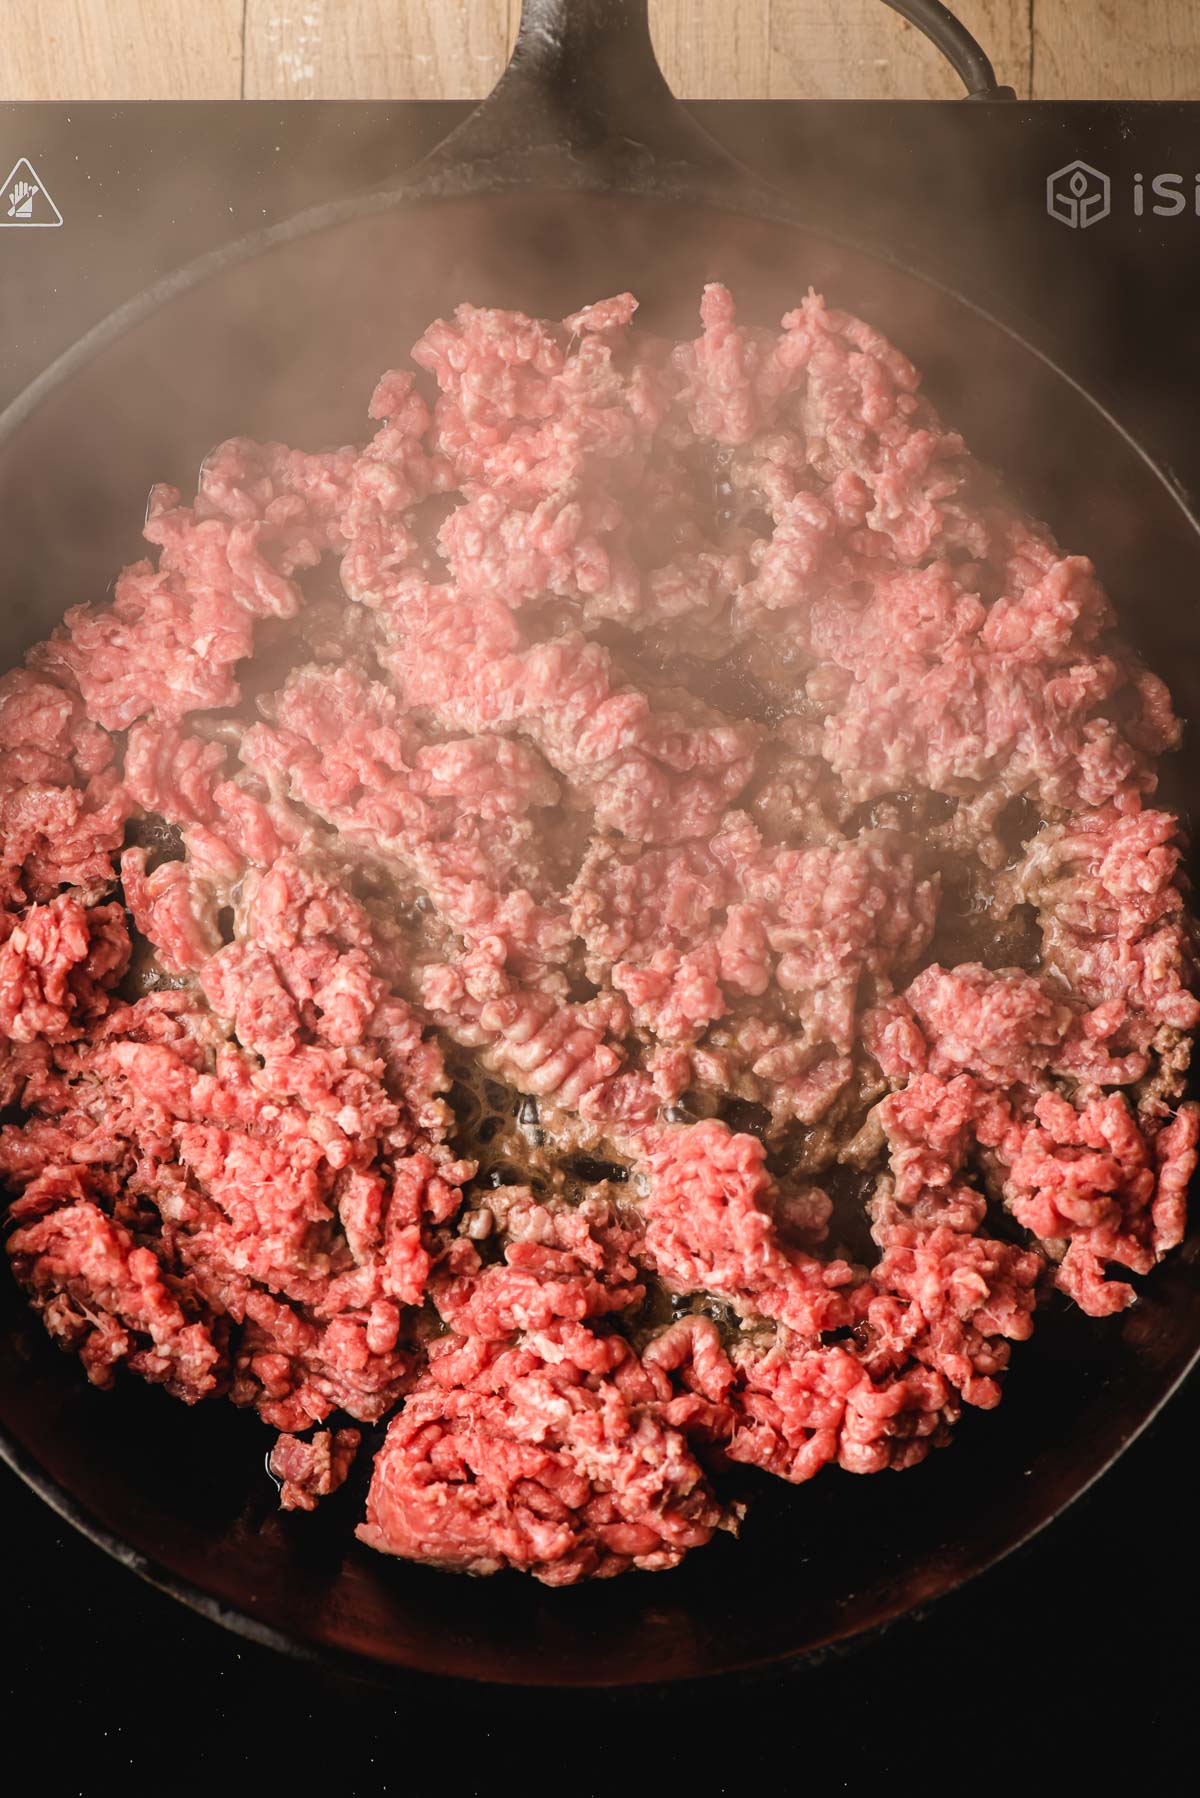 Ground beef cooking in a cast iron skillet.